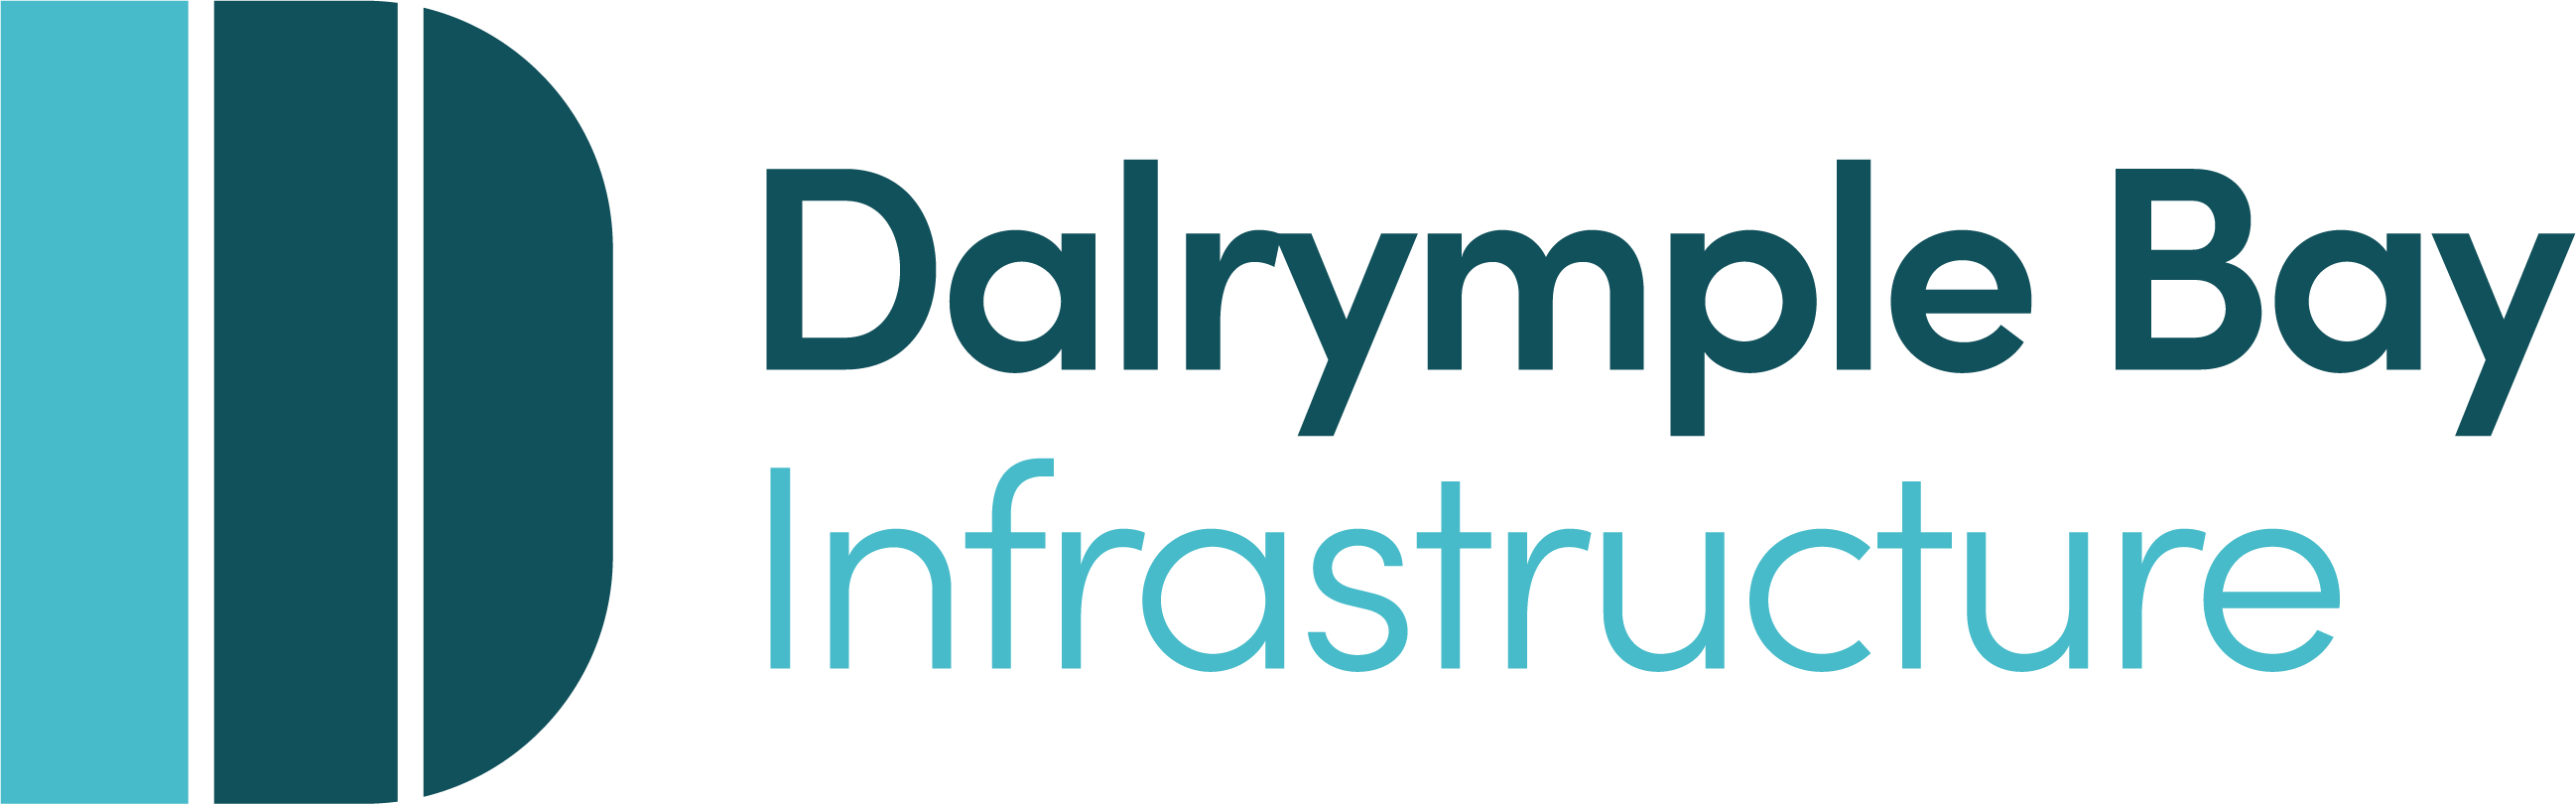 DALRYMPLE BAY INFRASTRUCTURE